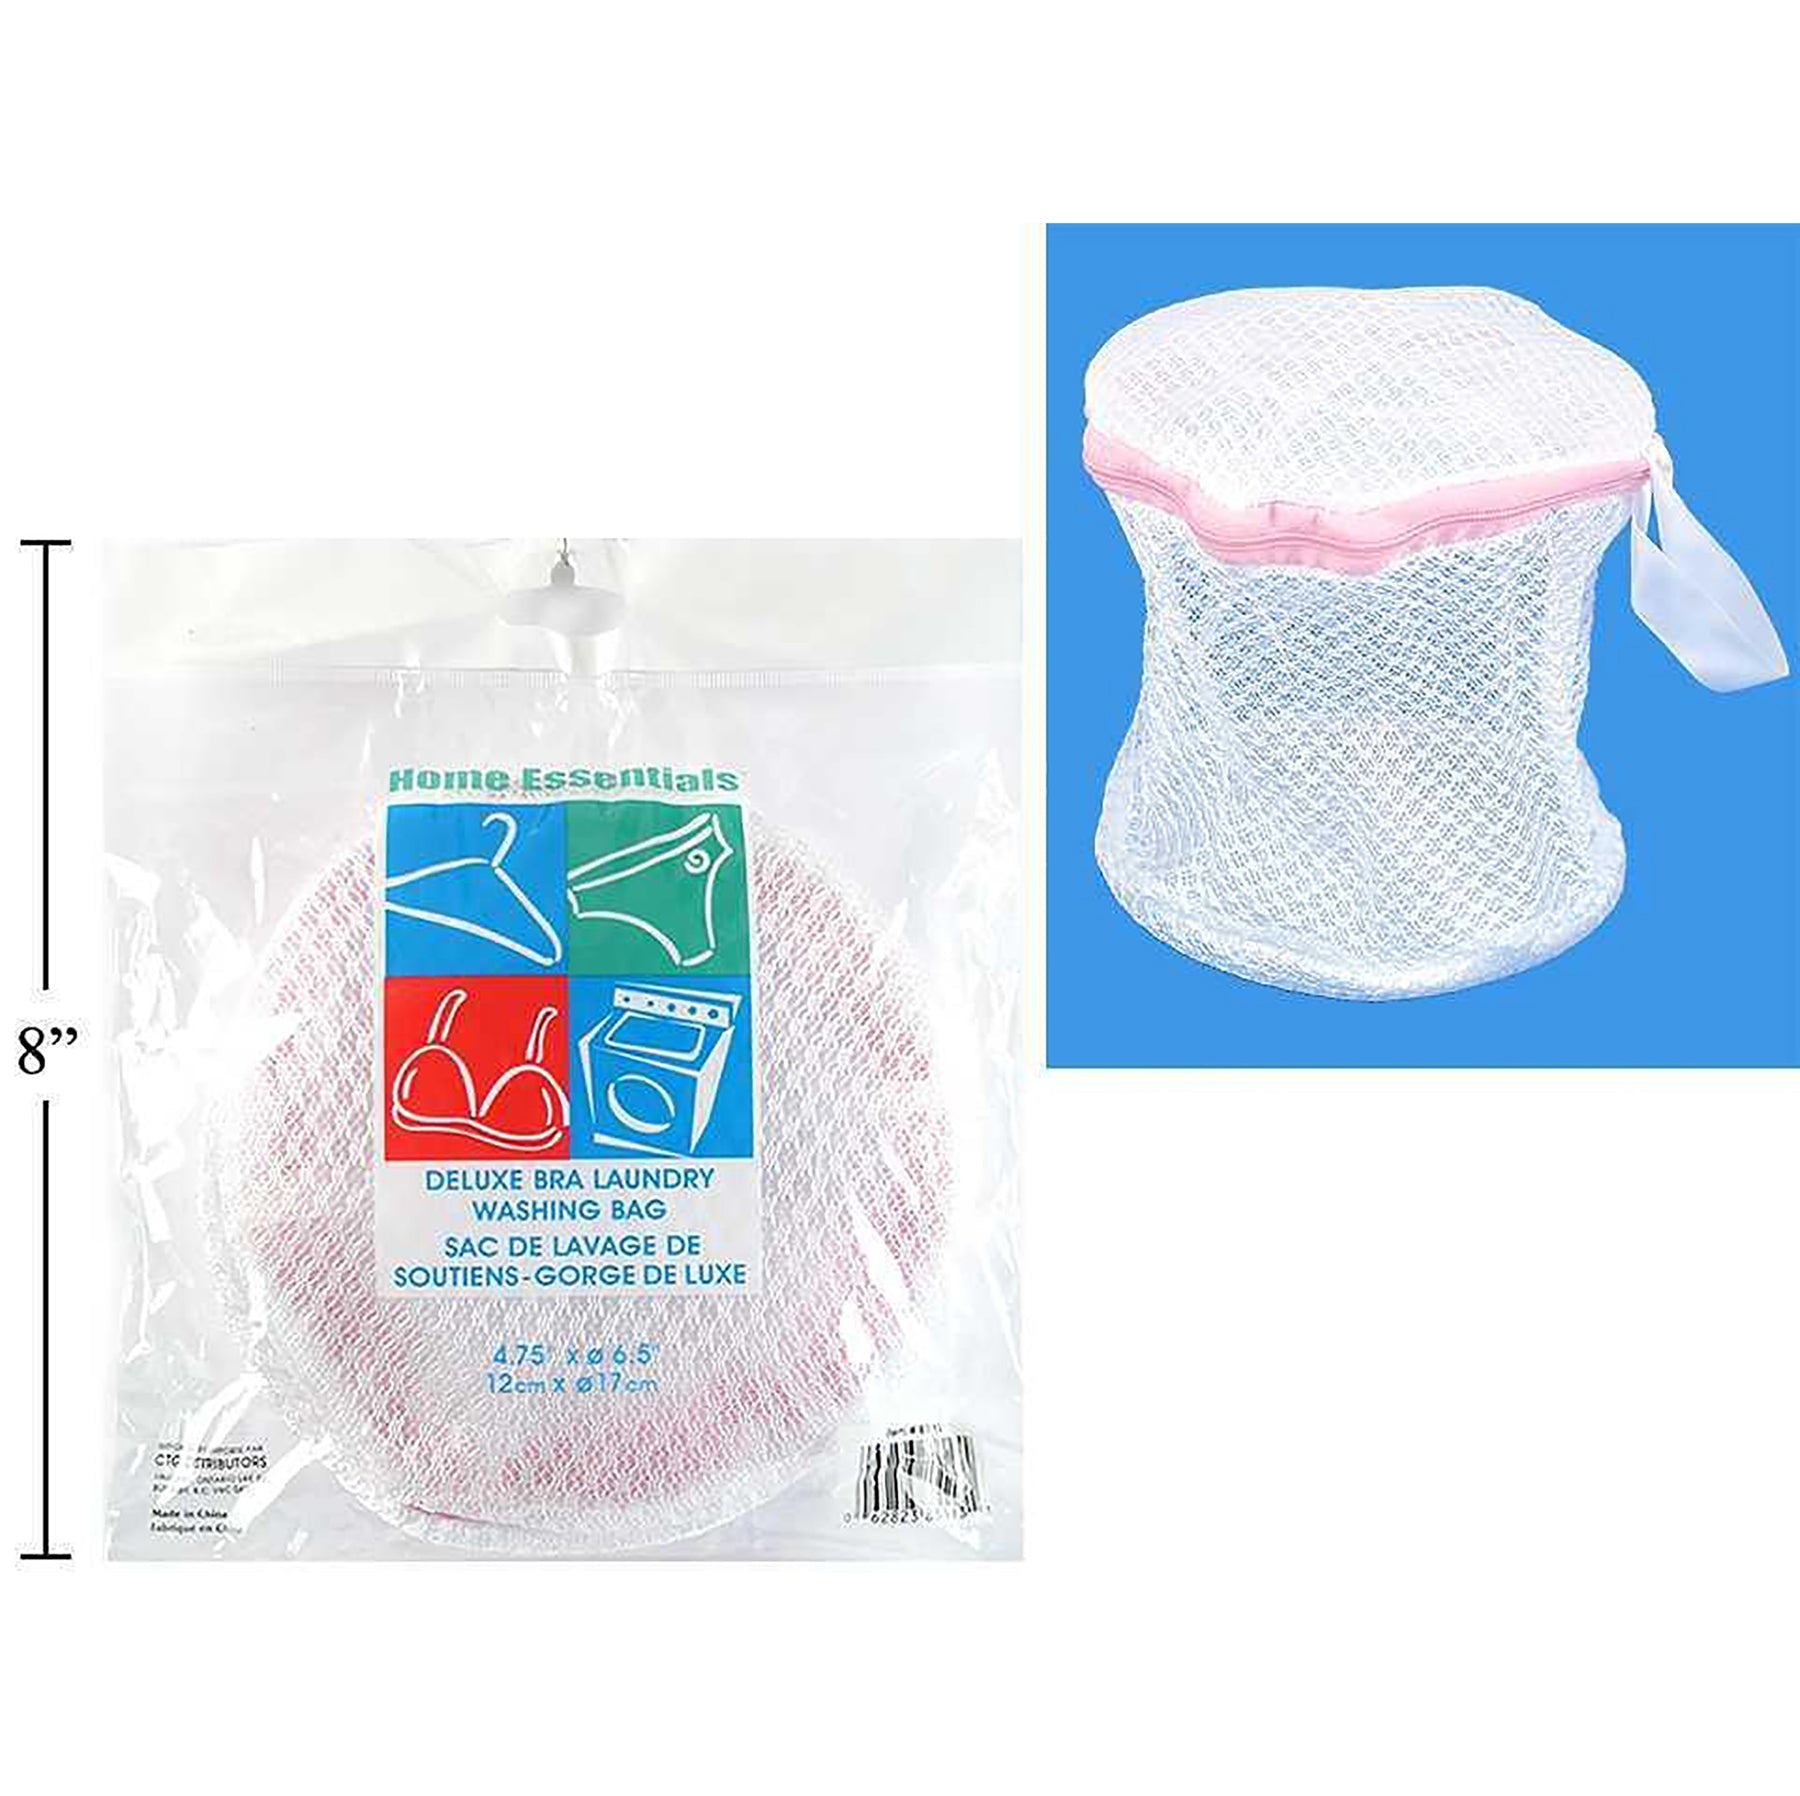 Home Essentials Bra Laundry Washing Bag 6.5in dia x 4.75in